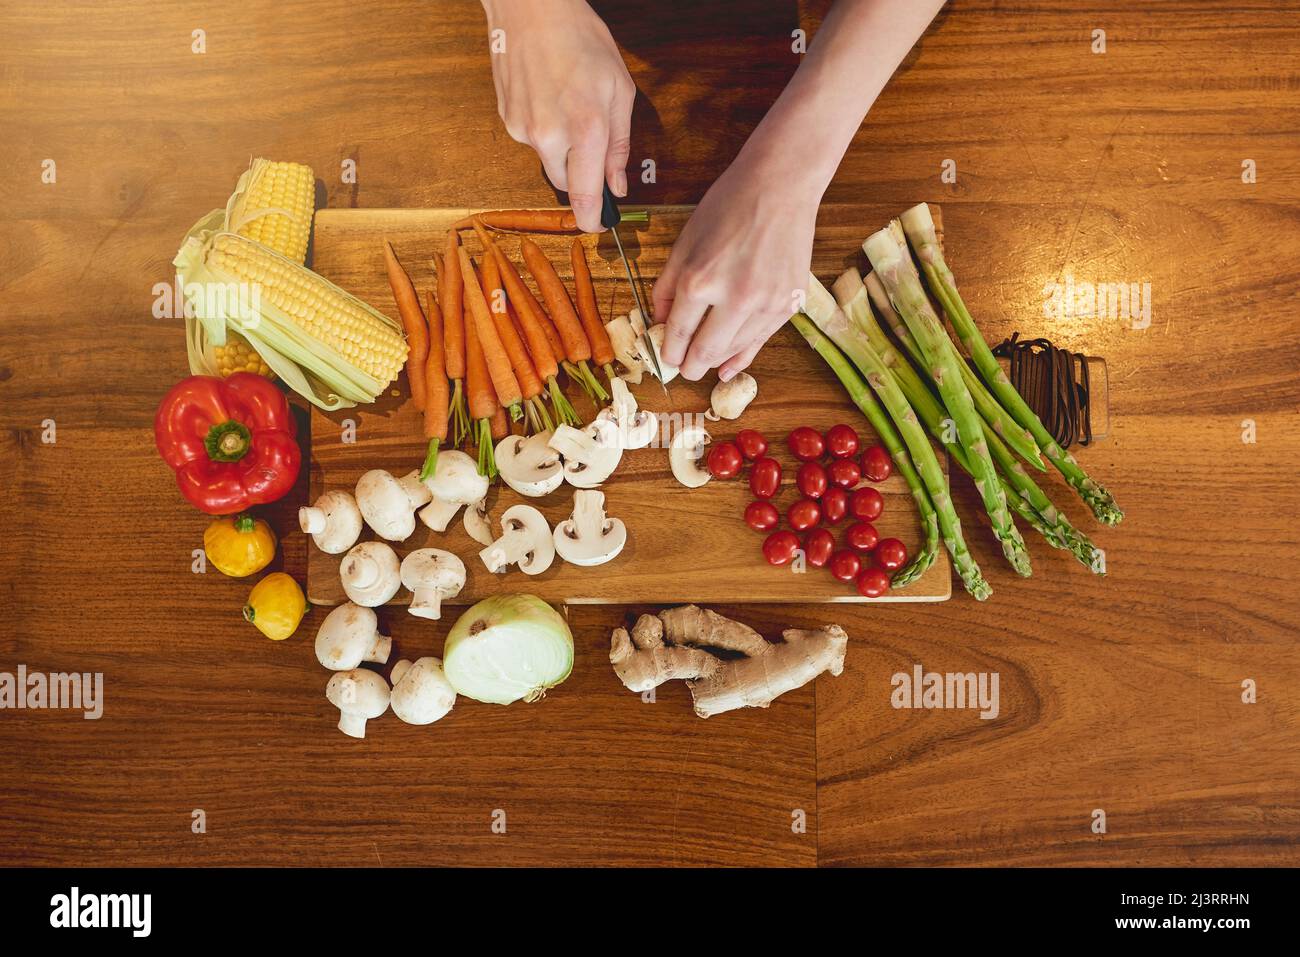 Eat green, eat clean. High angle shot of a woman cutting a variety of healthy vegetables on a chopping board. Stock Photo